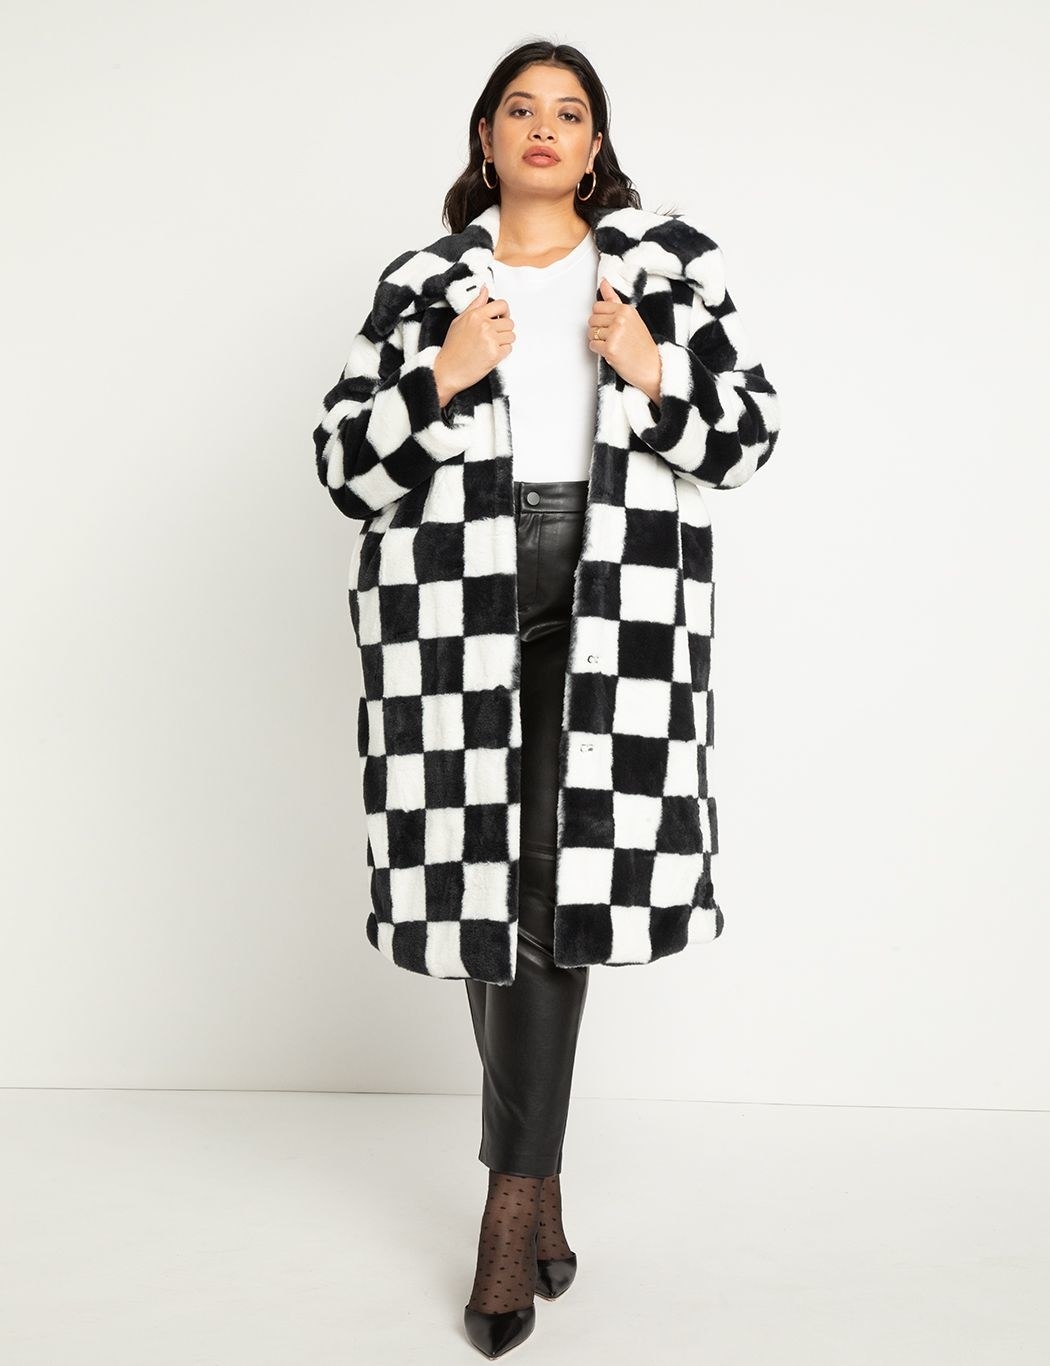 A model in the check coat